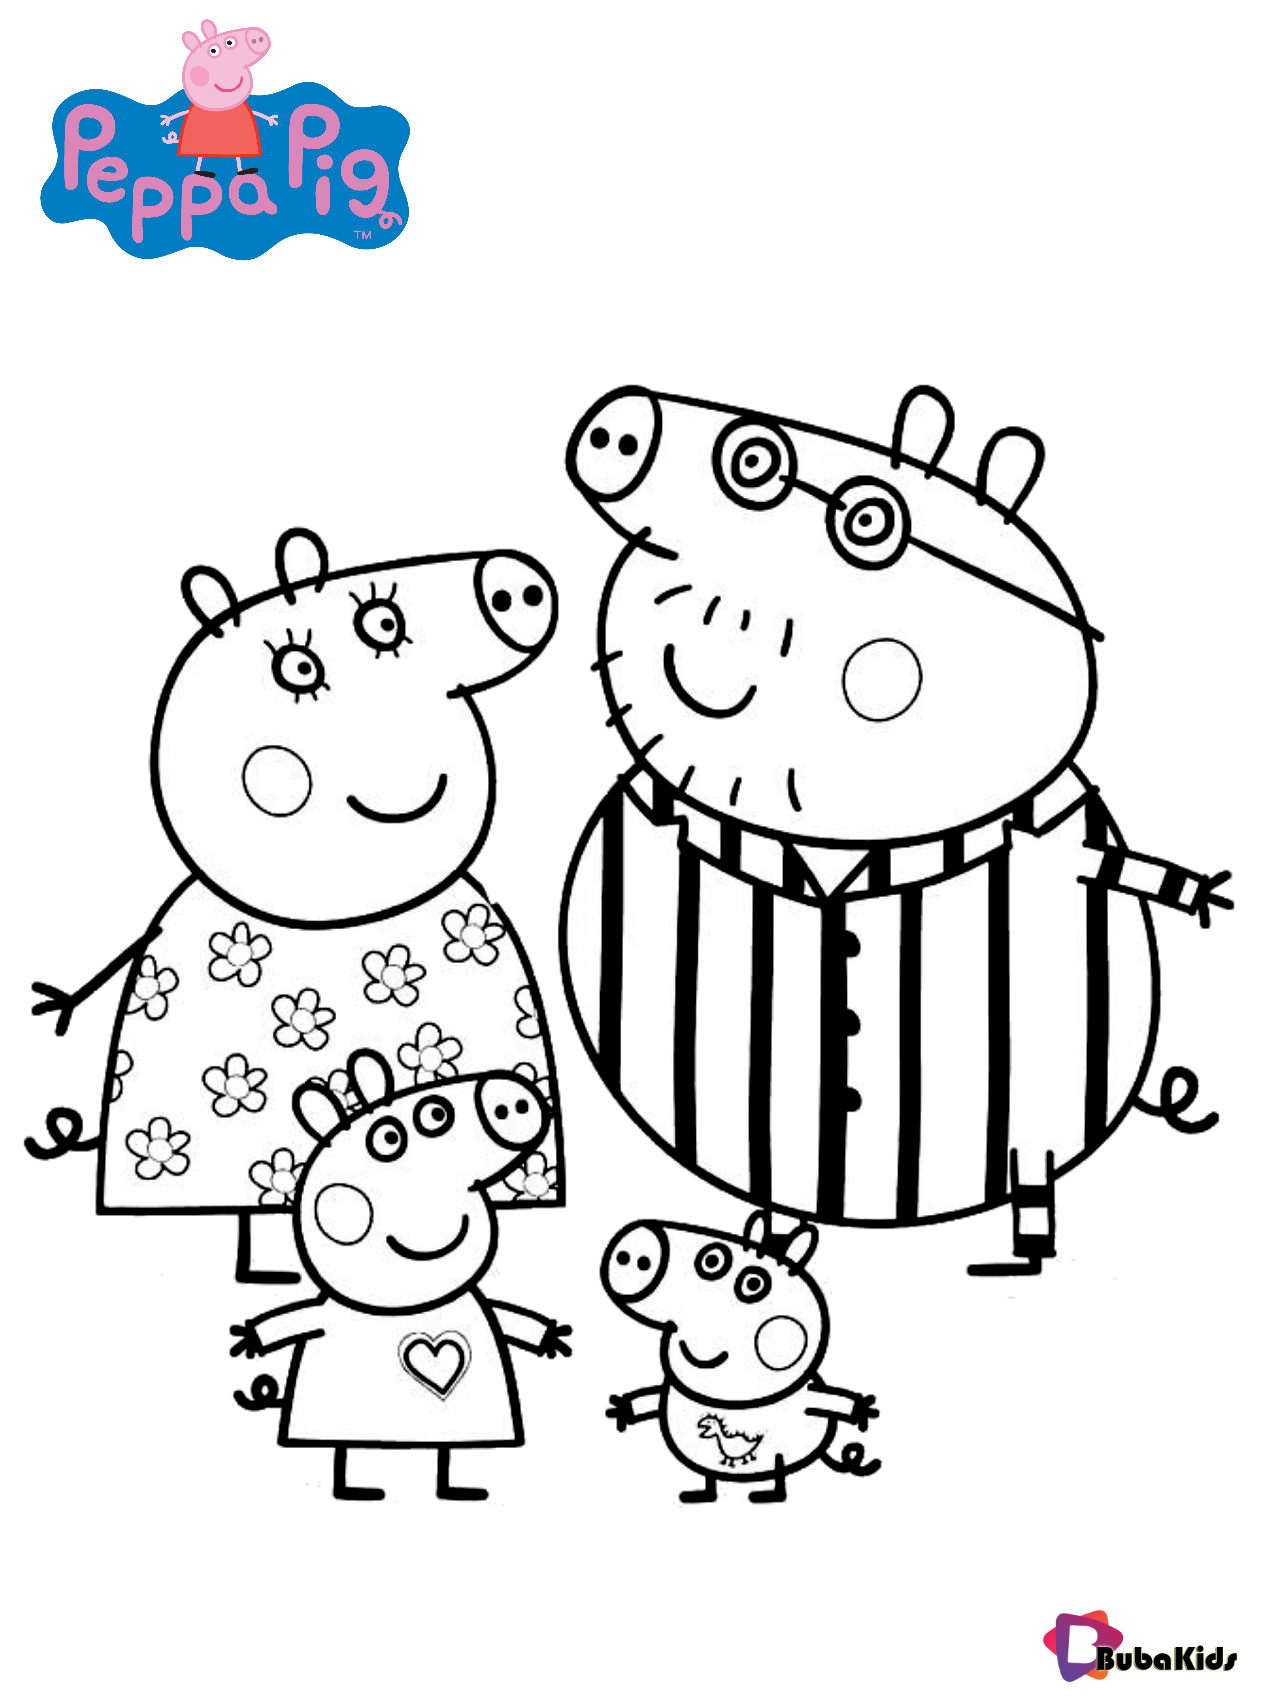 Peppa pig family coloring page - BubaKids.com